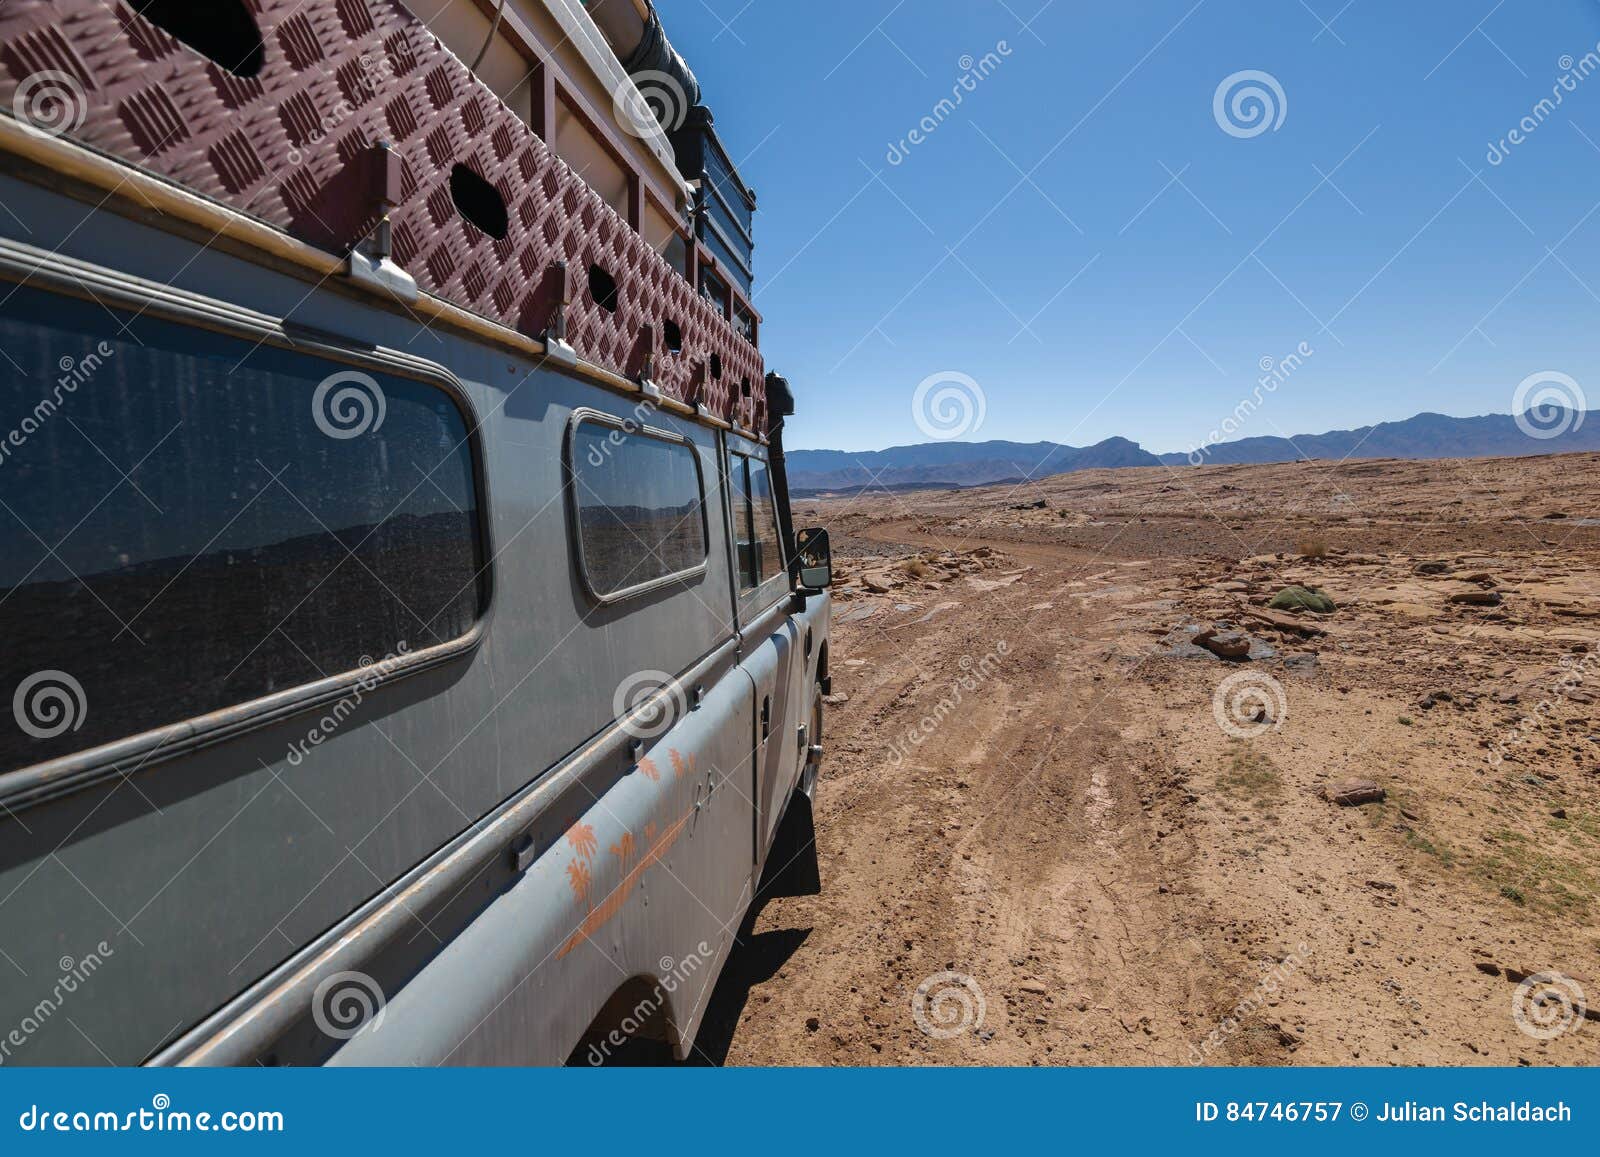 four by 4 oldtimer driving off road in morocco